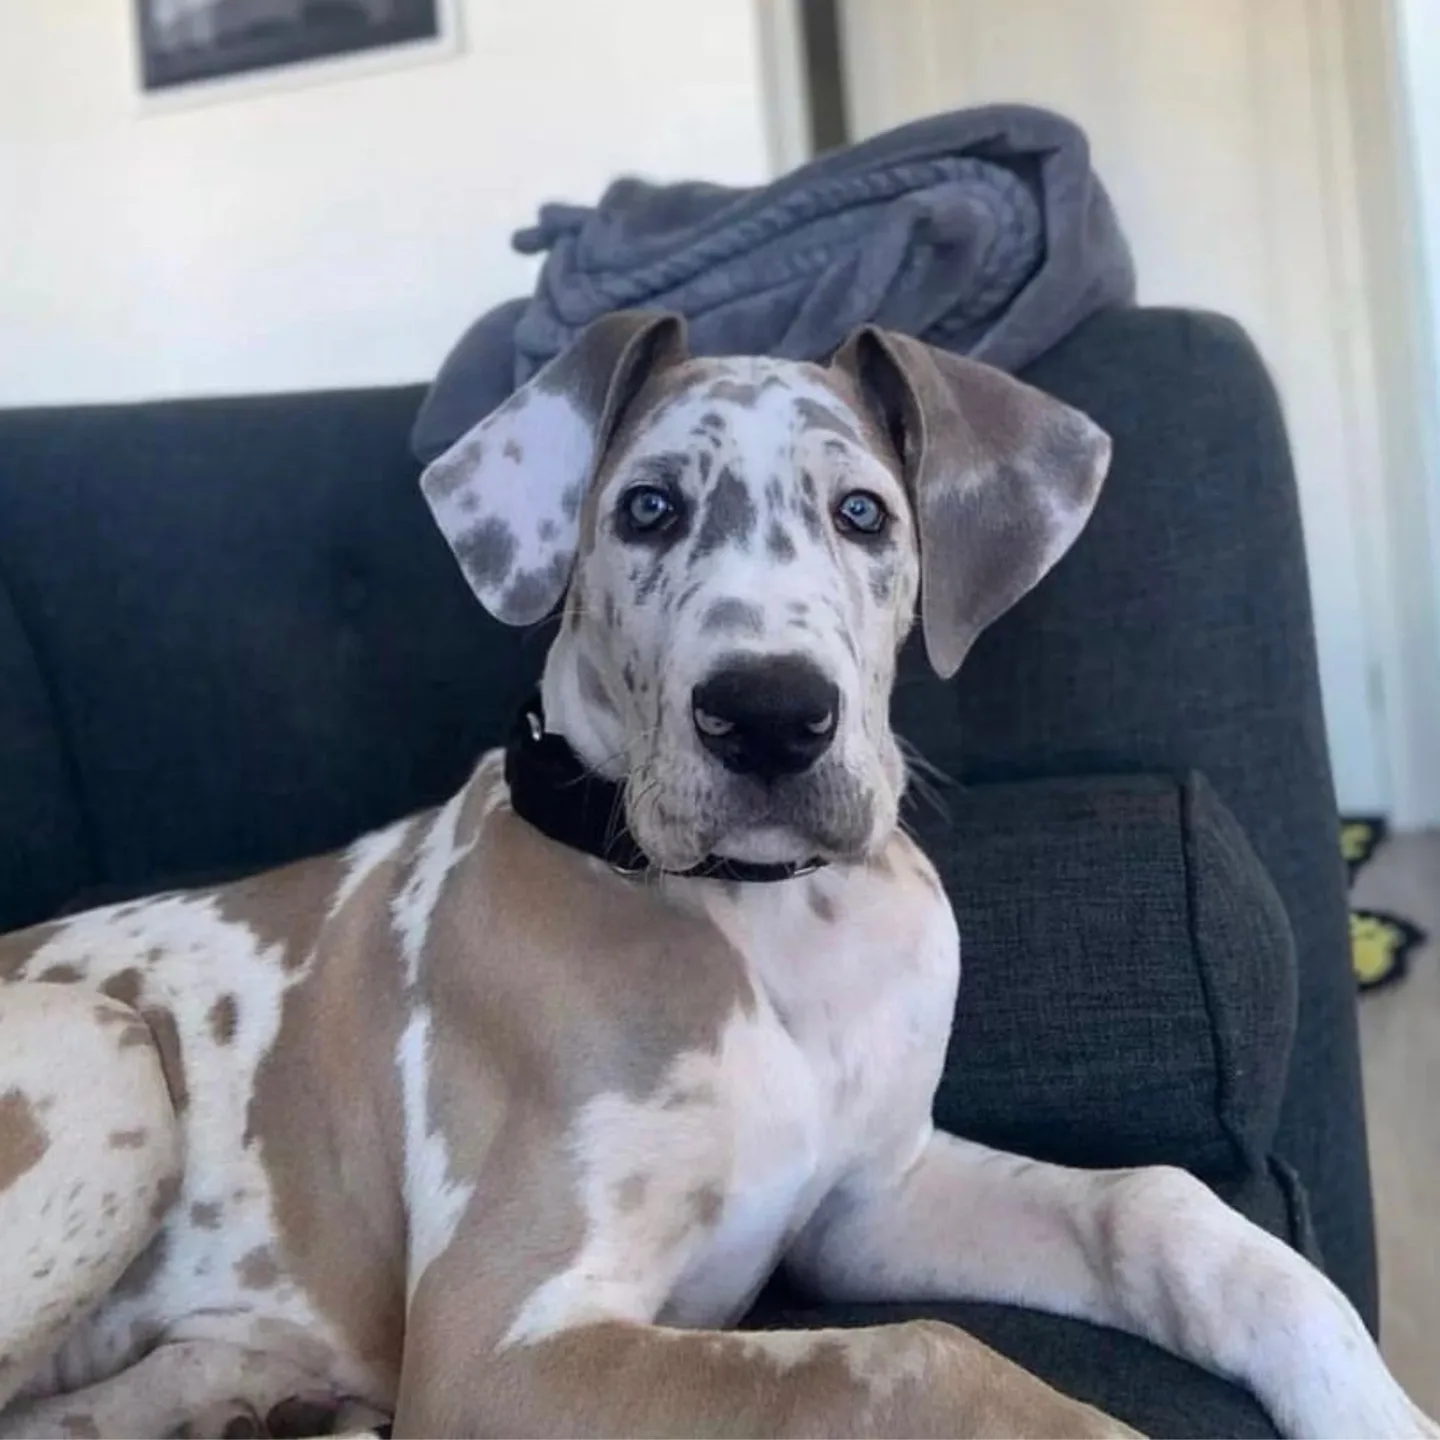 A merle great dane dog on the couch